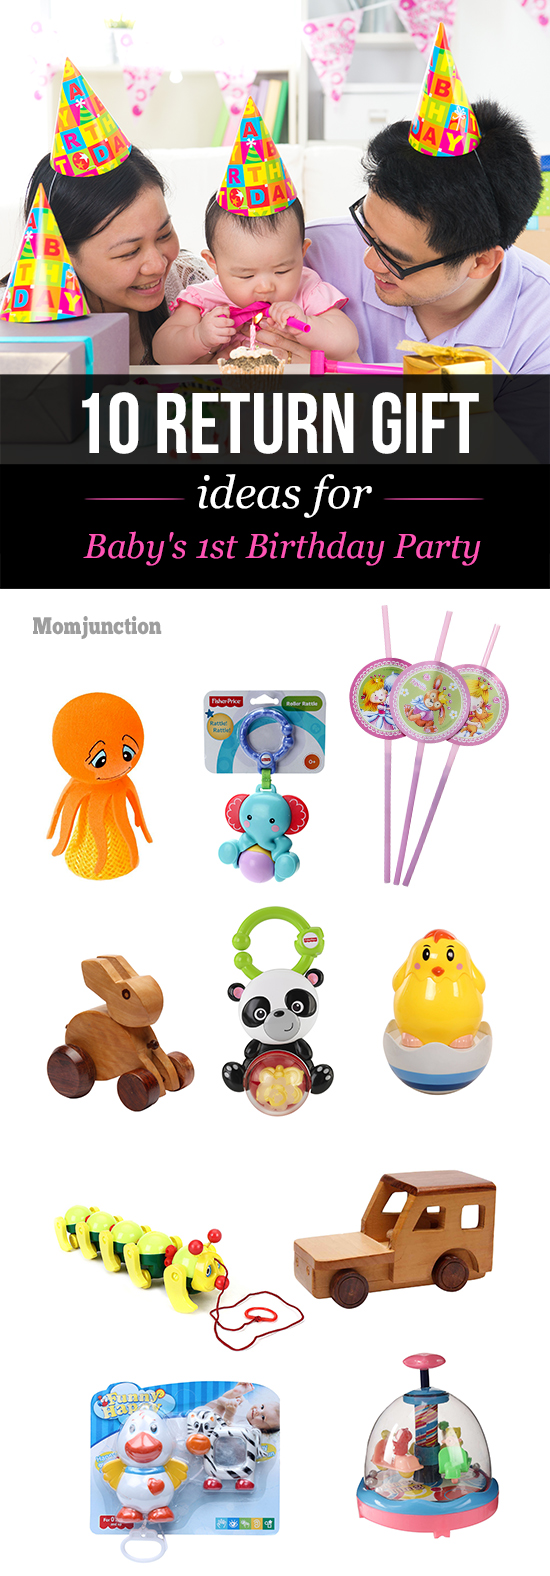 Best 20 Return Gift Ideas for 1st Birthday Home, Family, Style and